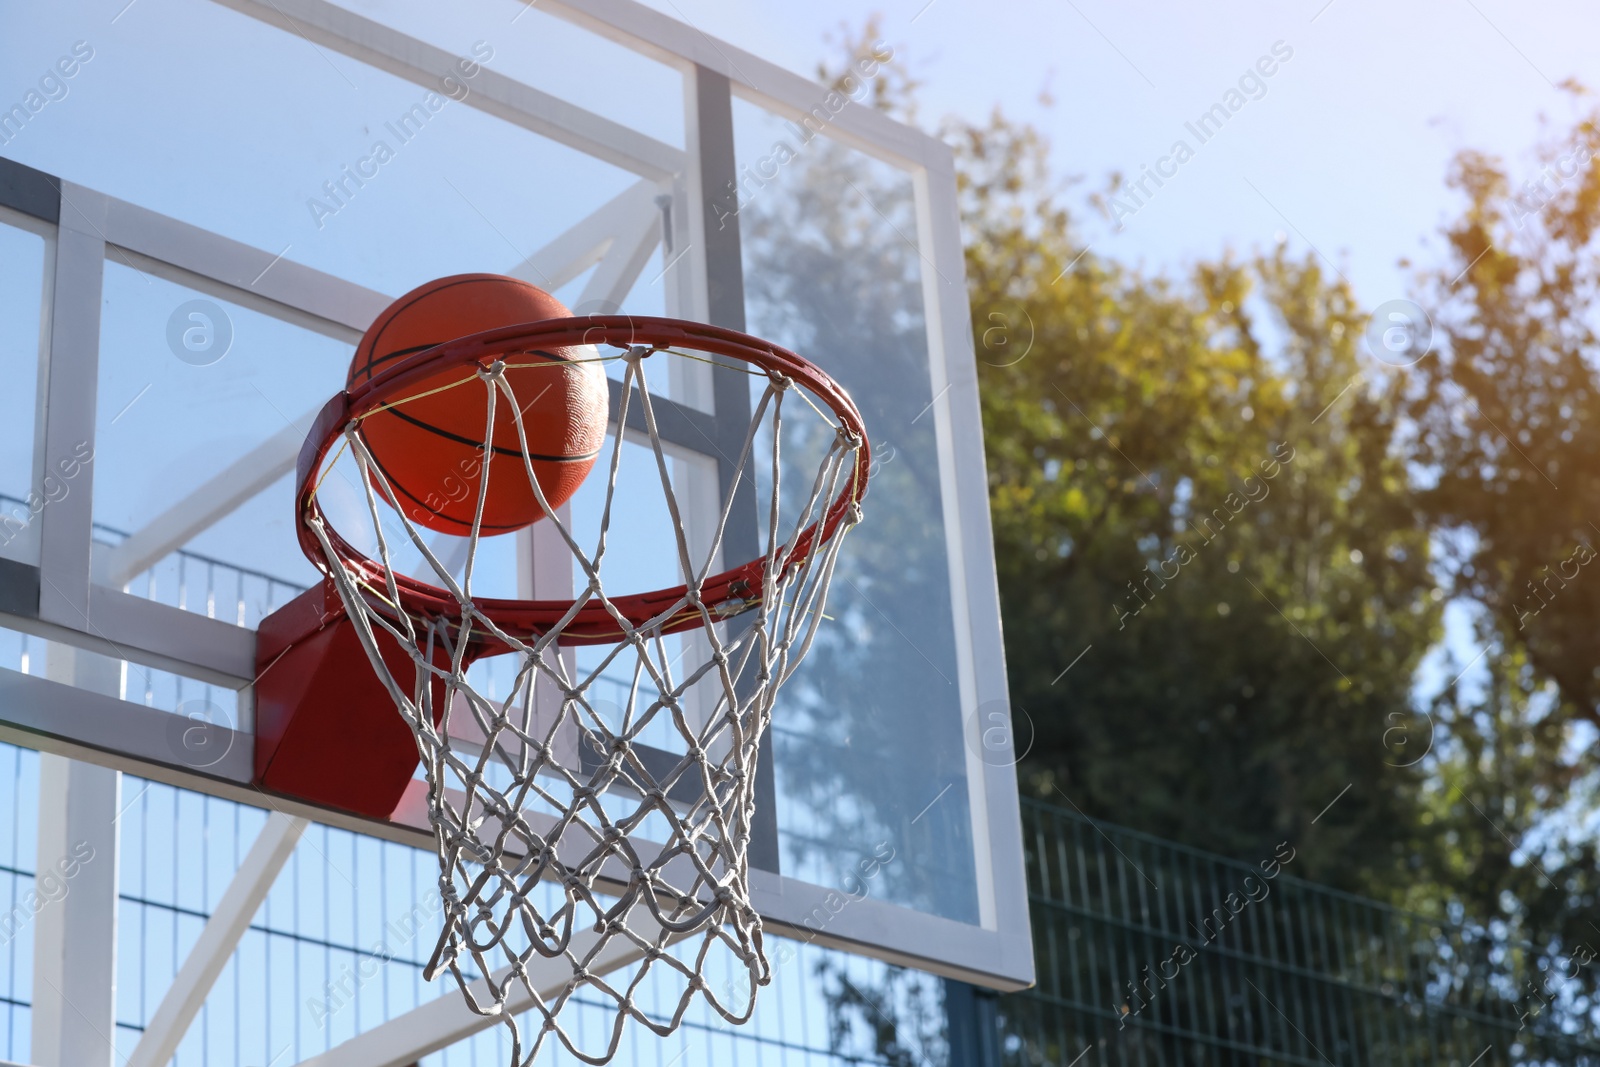 Photo of Basketball ball and hoop with net outdoors on sunny day